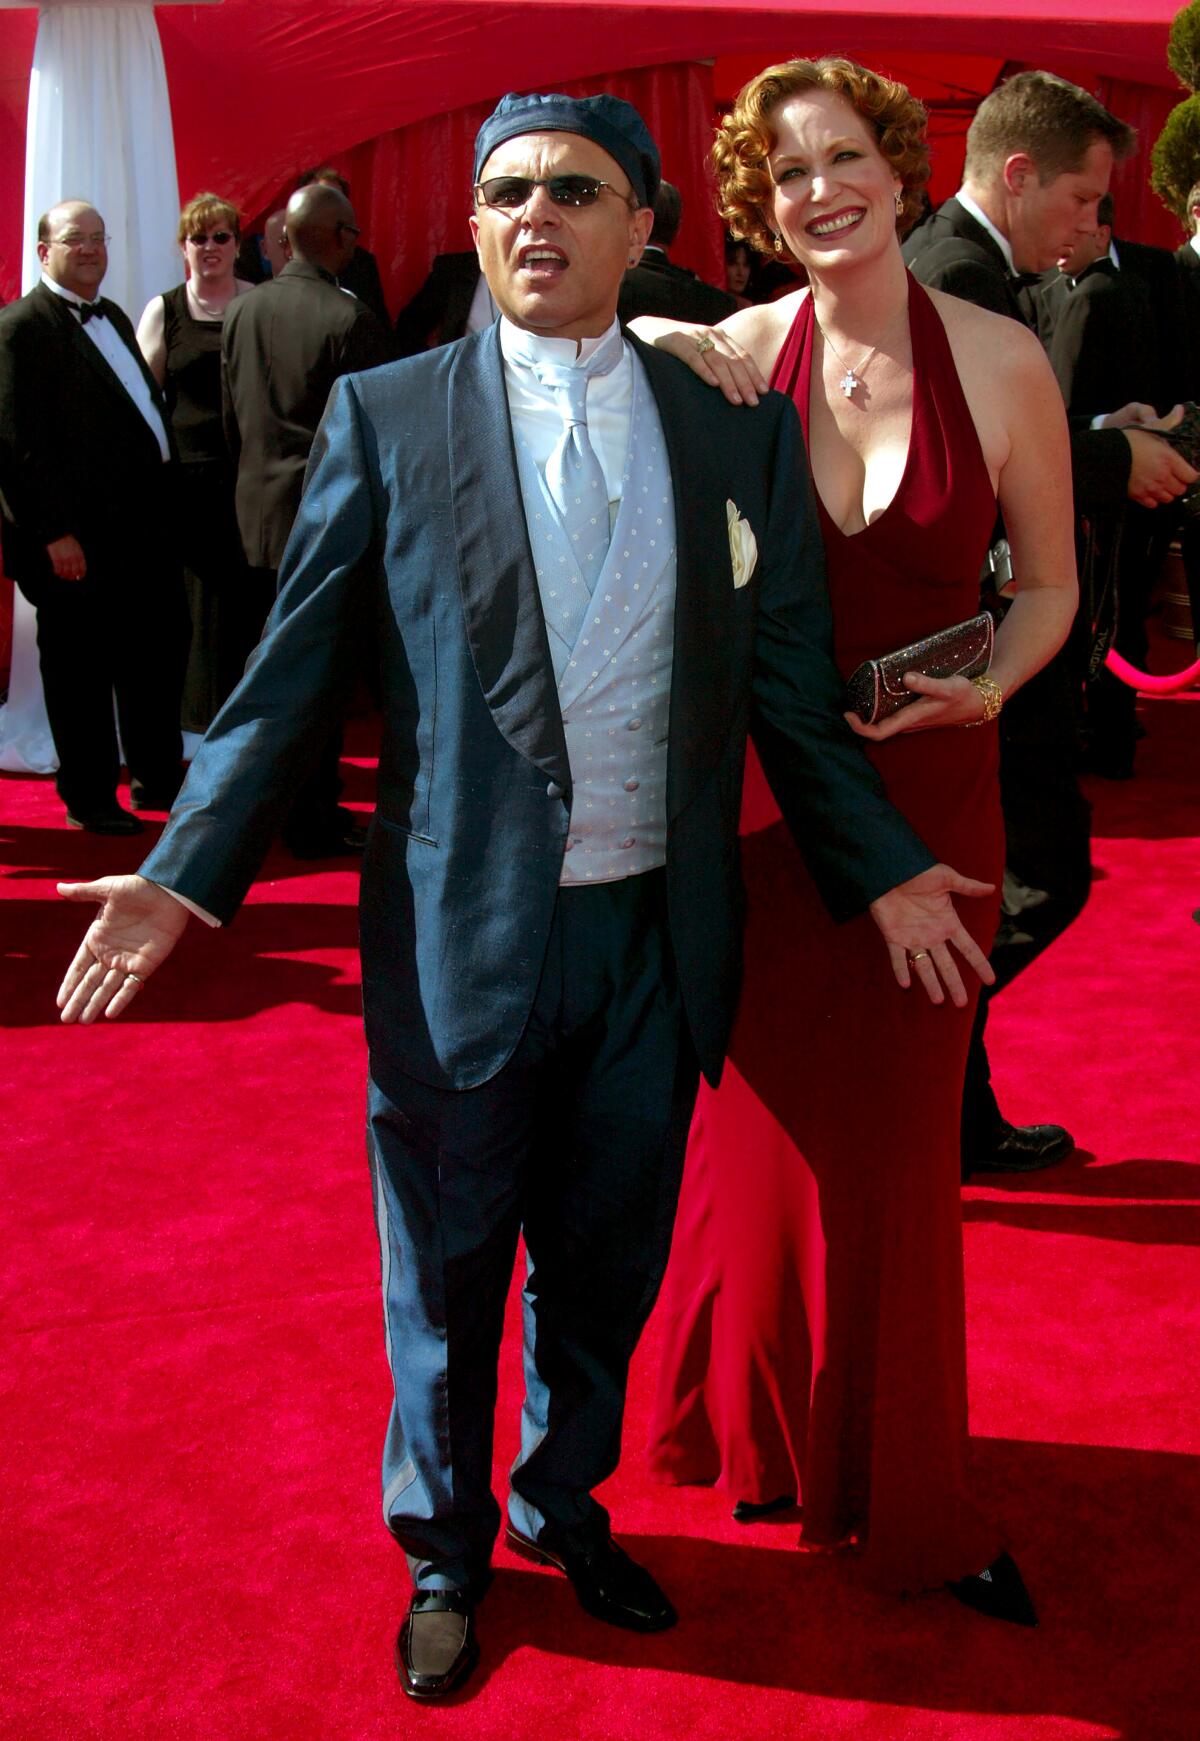 Joe Pantoliano and his wife on the red carpet at the 55th Primetime Emmy Awards 